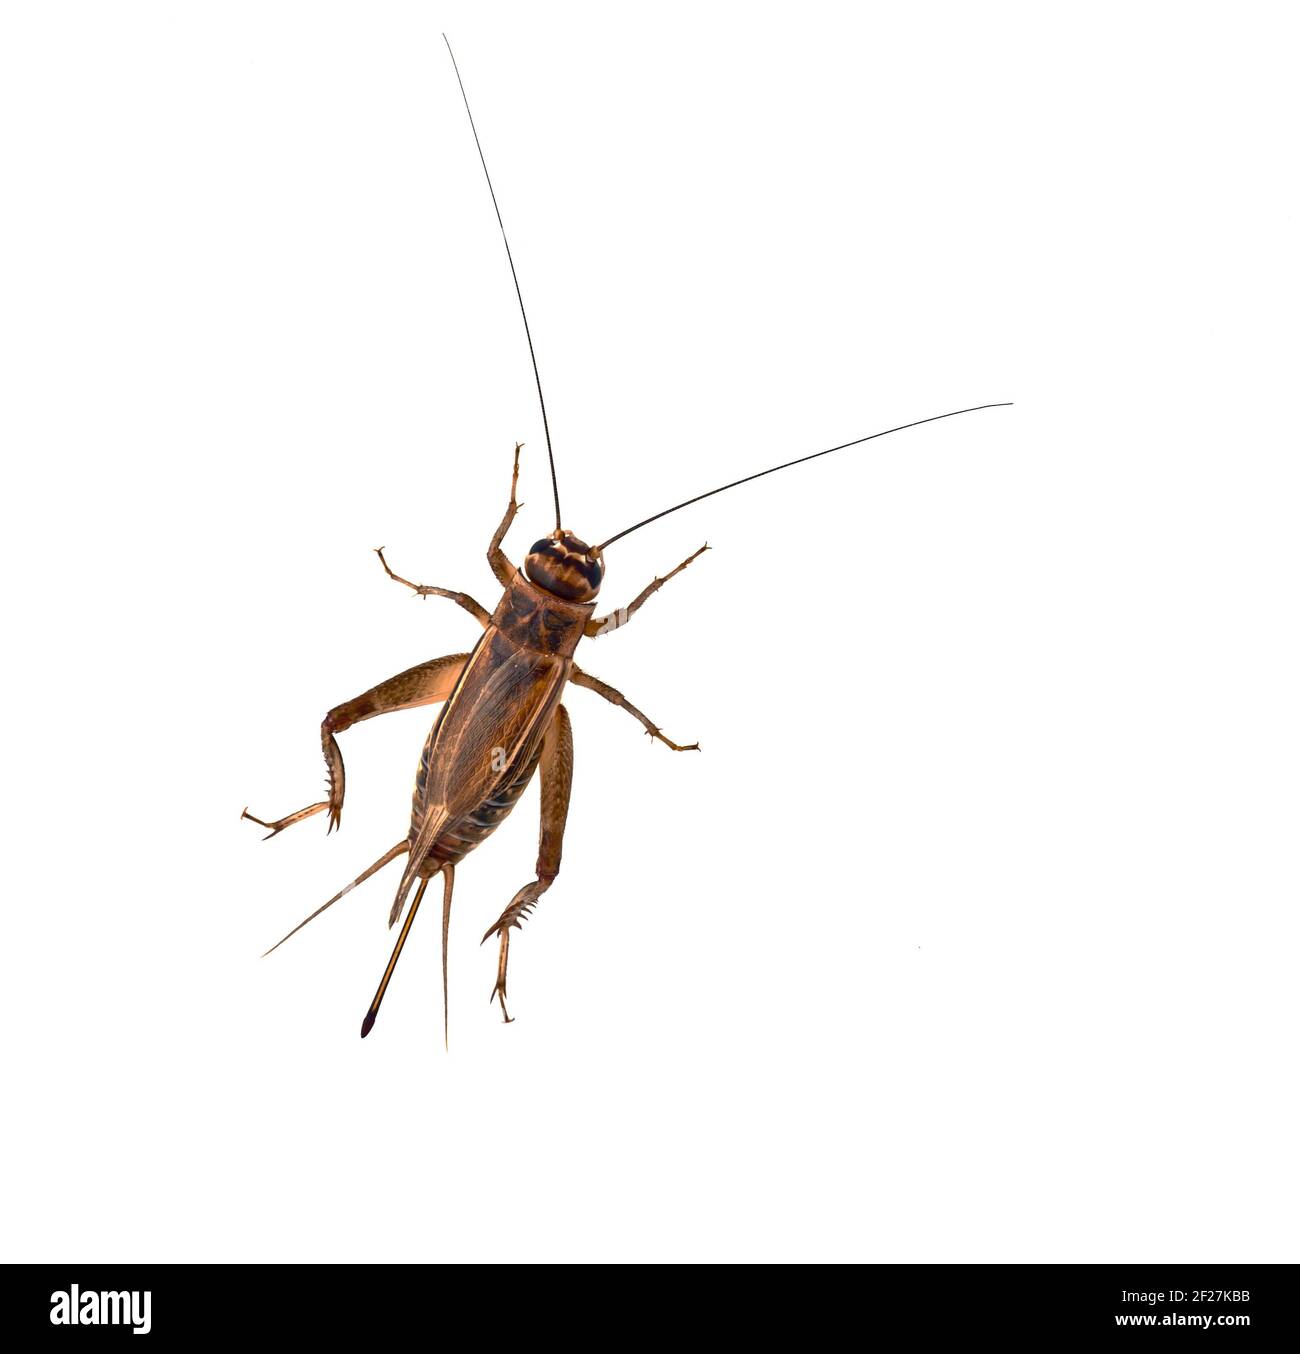 The house Cricket creeps on a white background Stock Photo